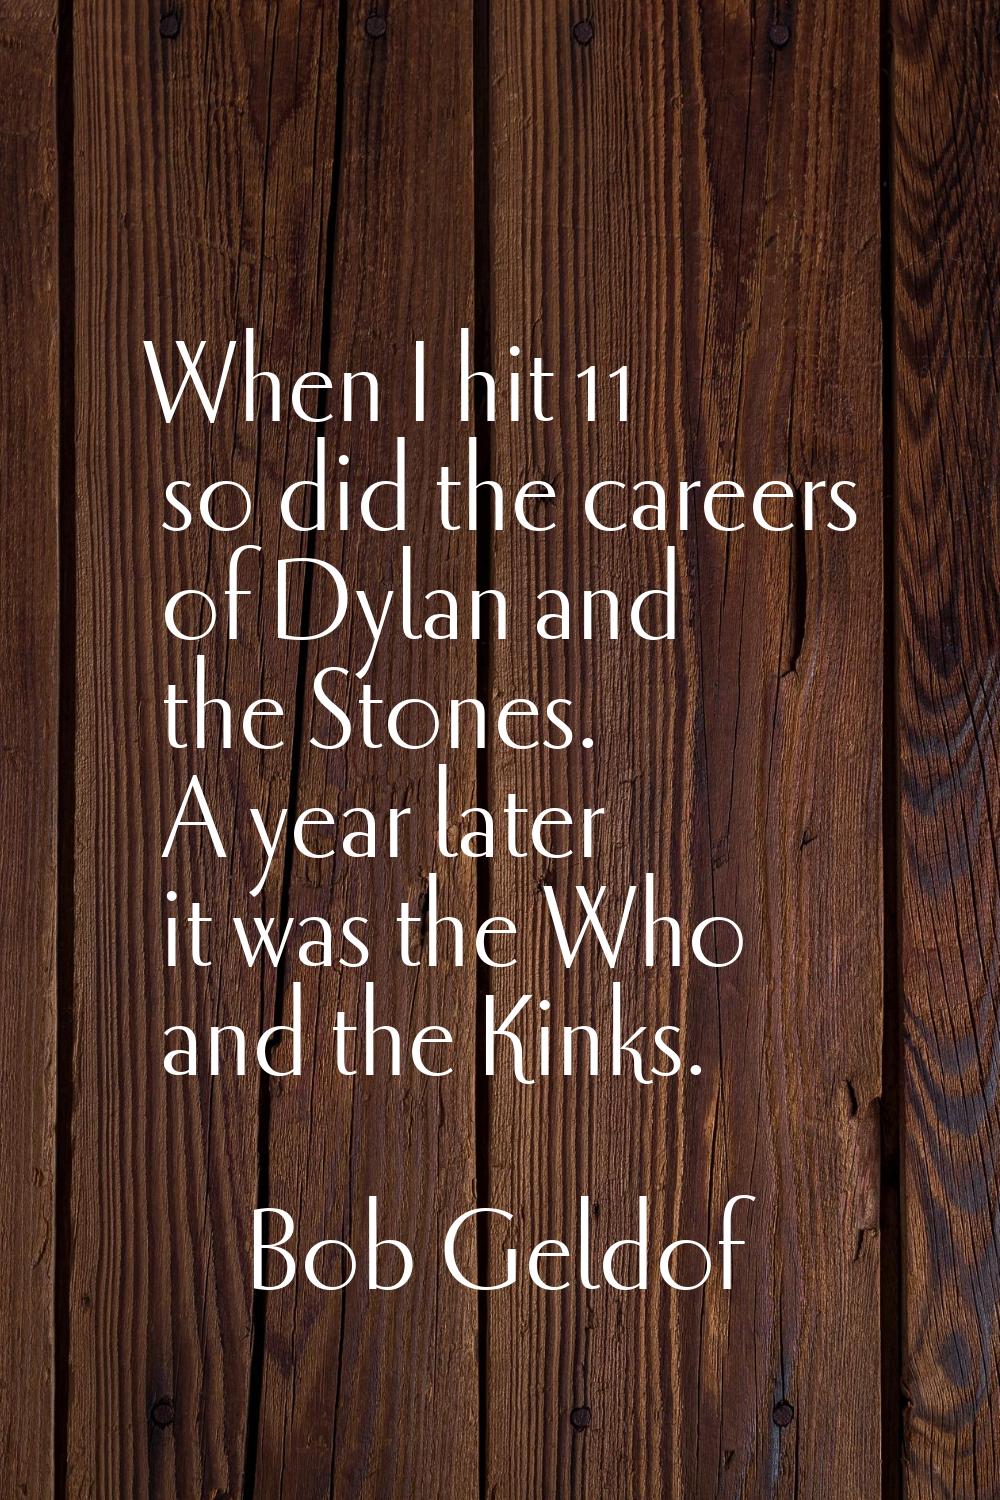 When I hit 11 so did the careers of Dylan and the Stones. A year later it was the Who and the Kinks